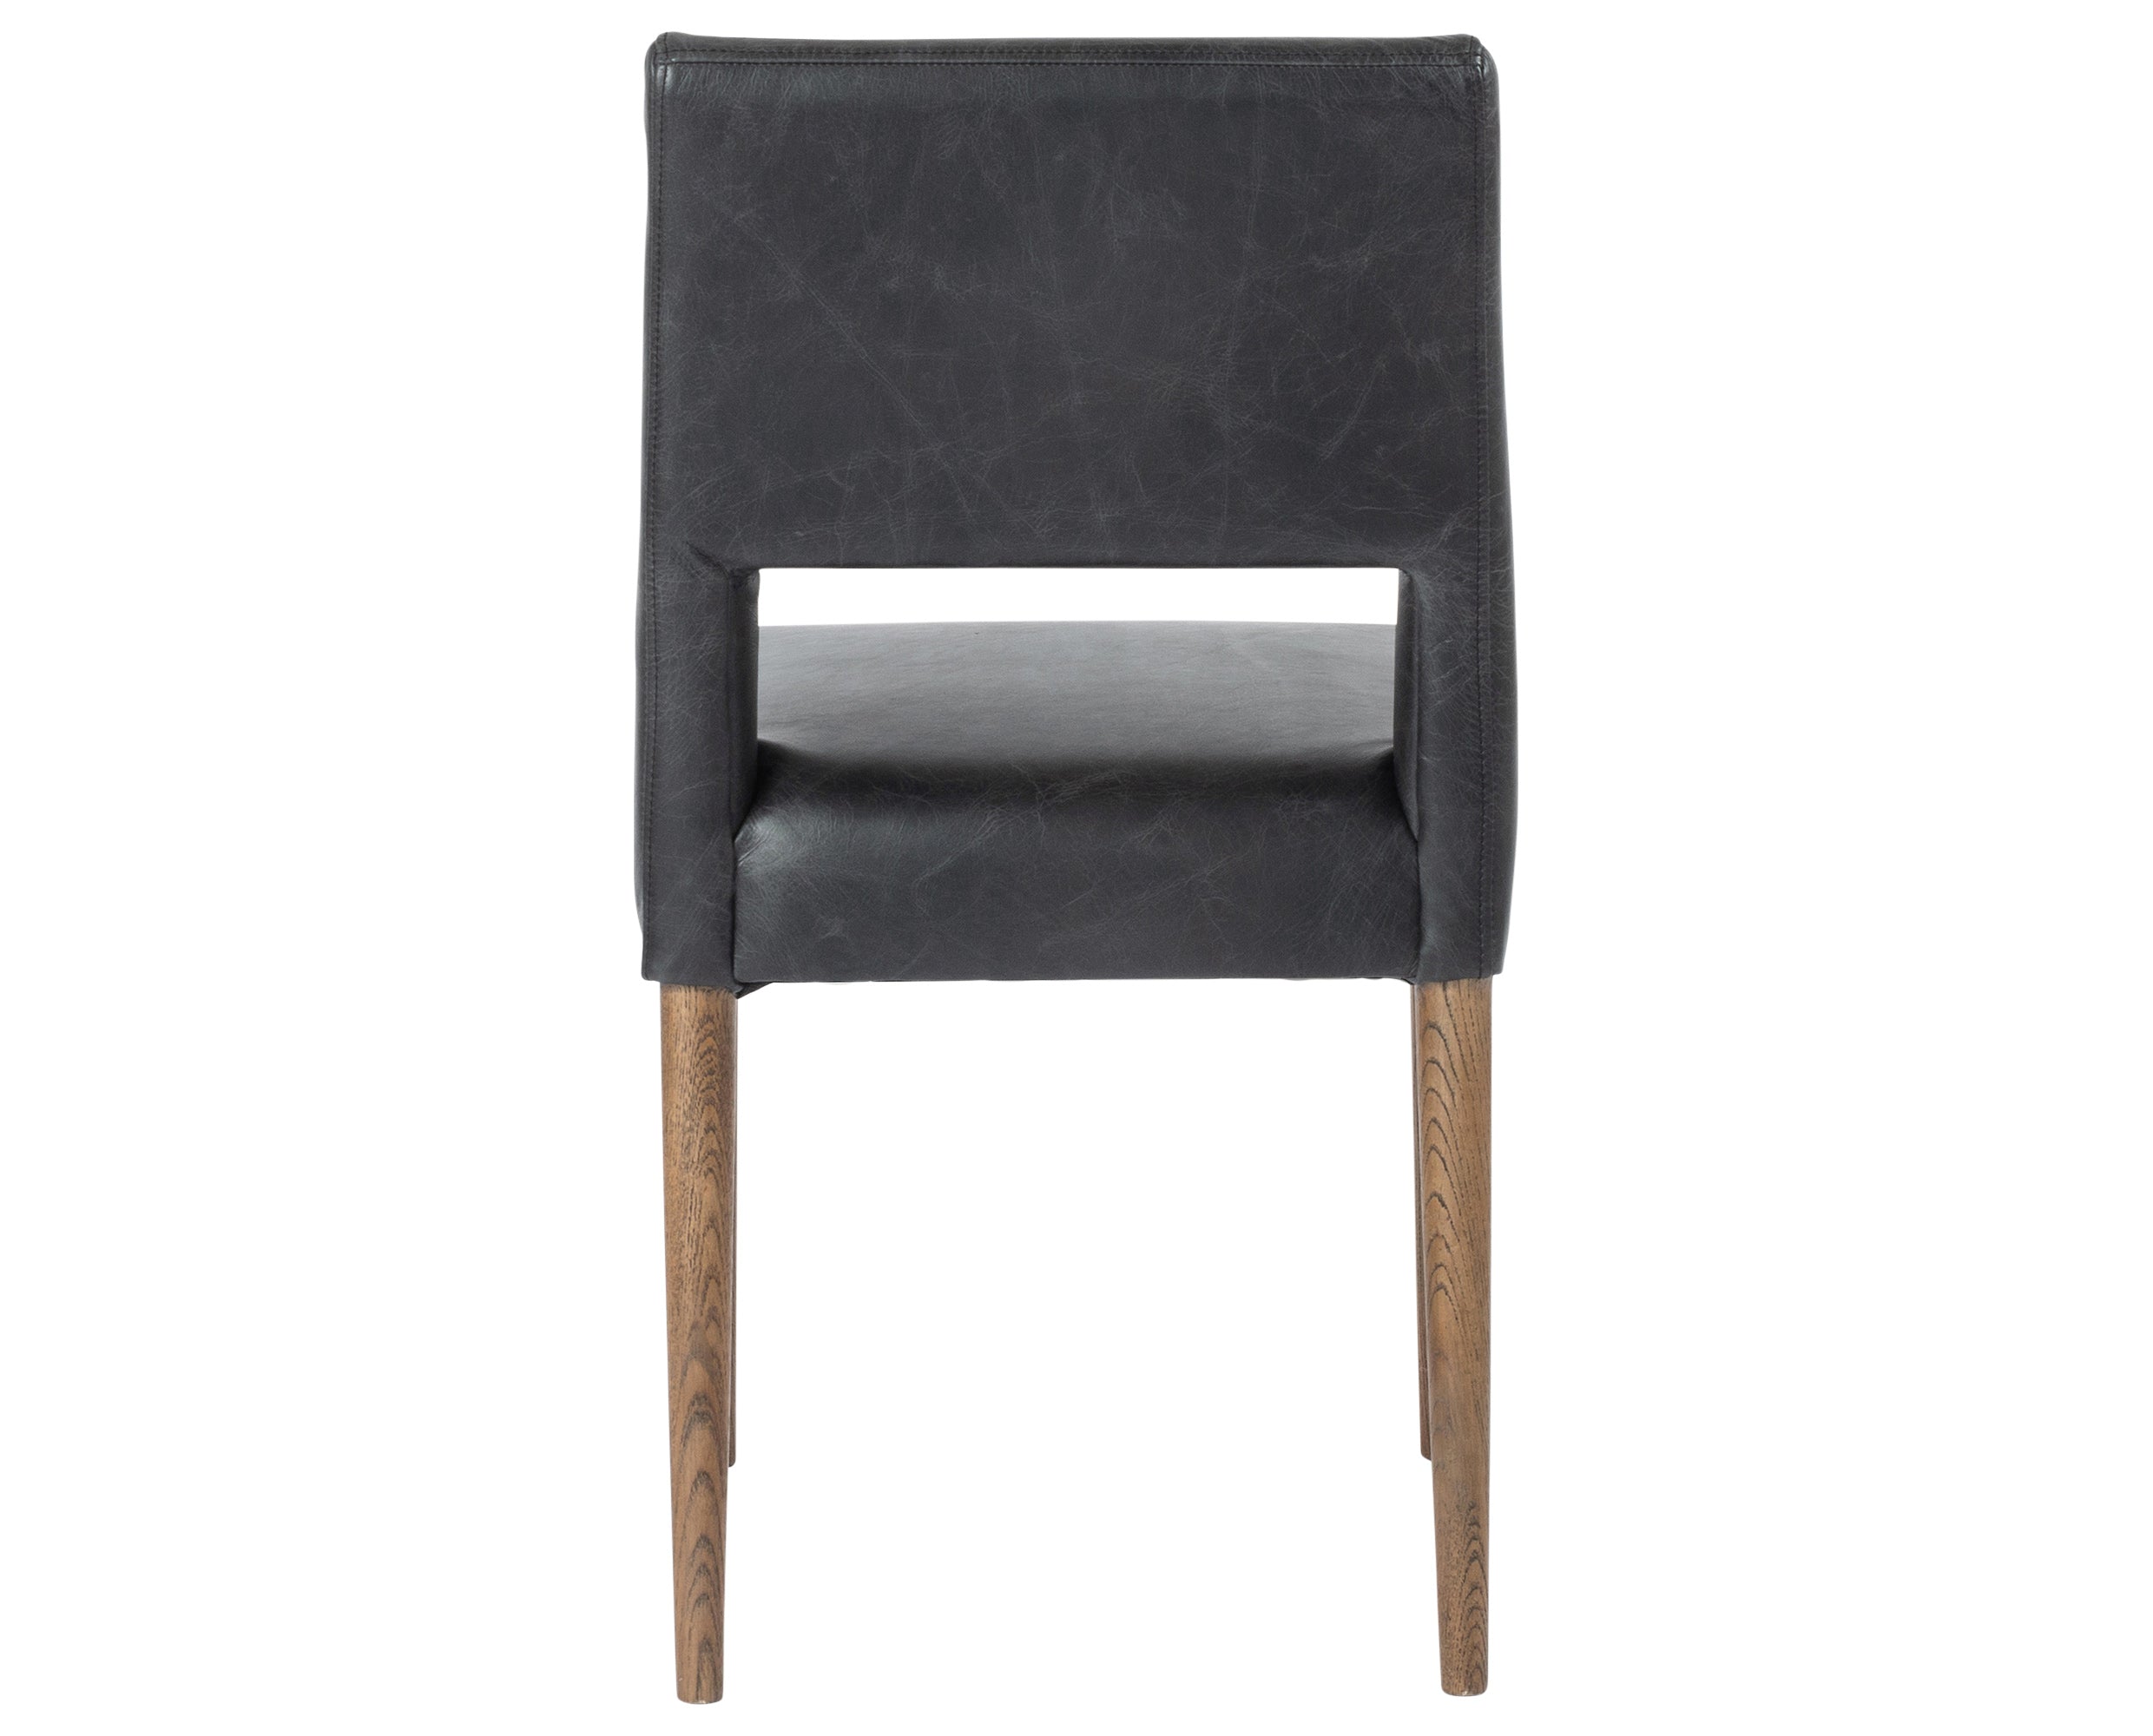 Durango Smoke Leather with Toasted Nettlewood | Joseph Dining Chair | Valley Ridge Furniture